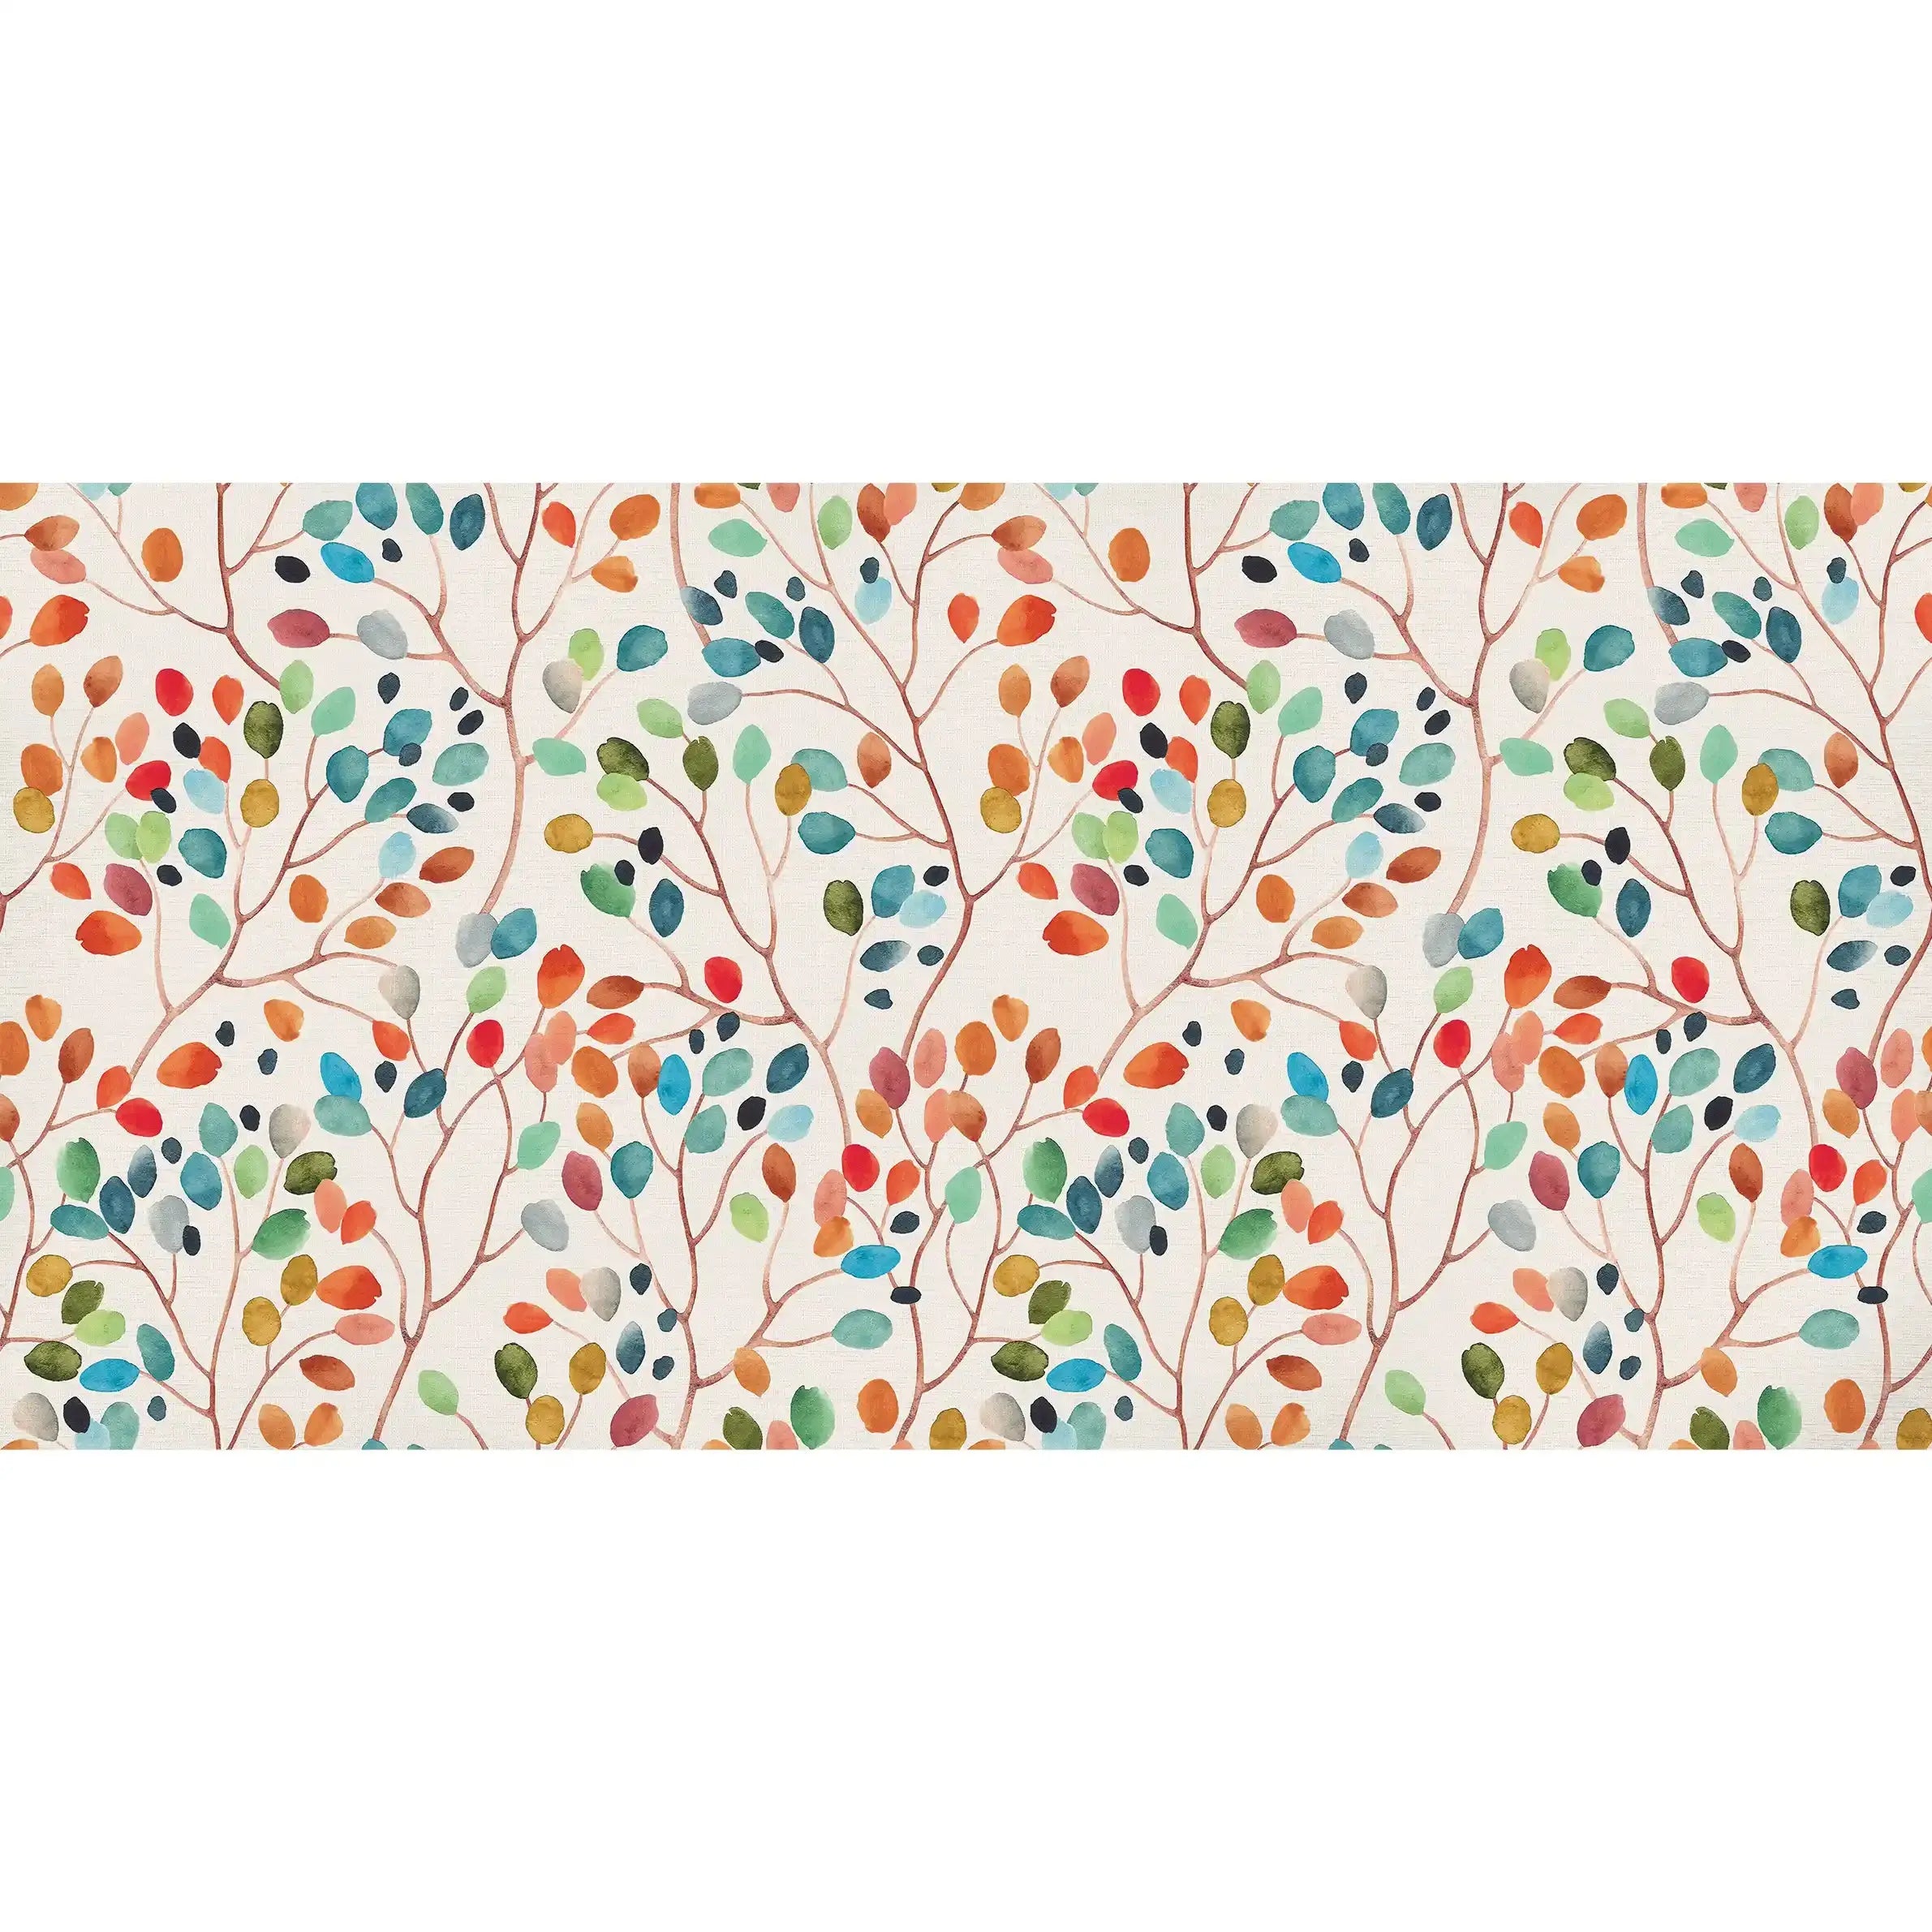 3063-B / Tropical Floral Peel and Stick Wallpaper - Colorful Woodland Branch, Decorative for Accent Wall, Removable and Easy to Install - Artevella